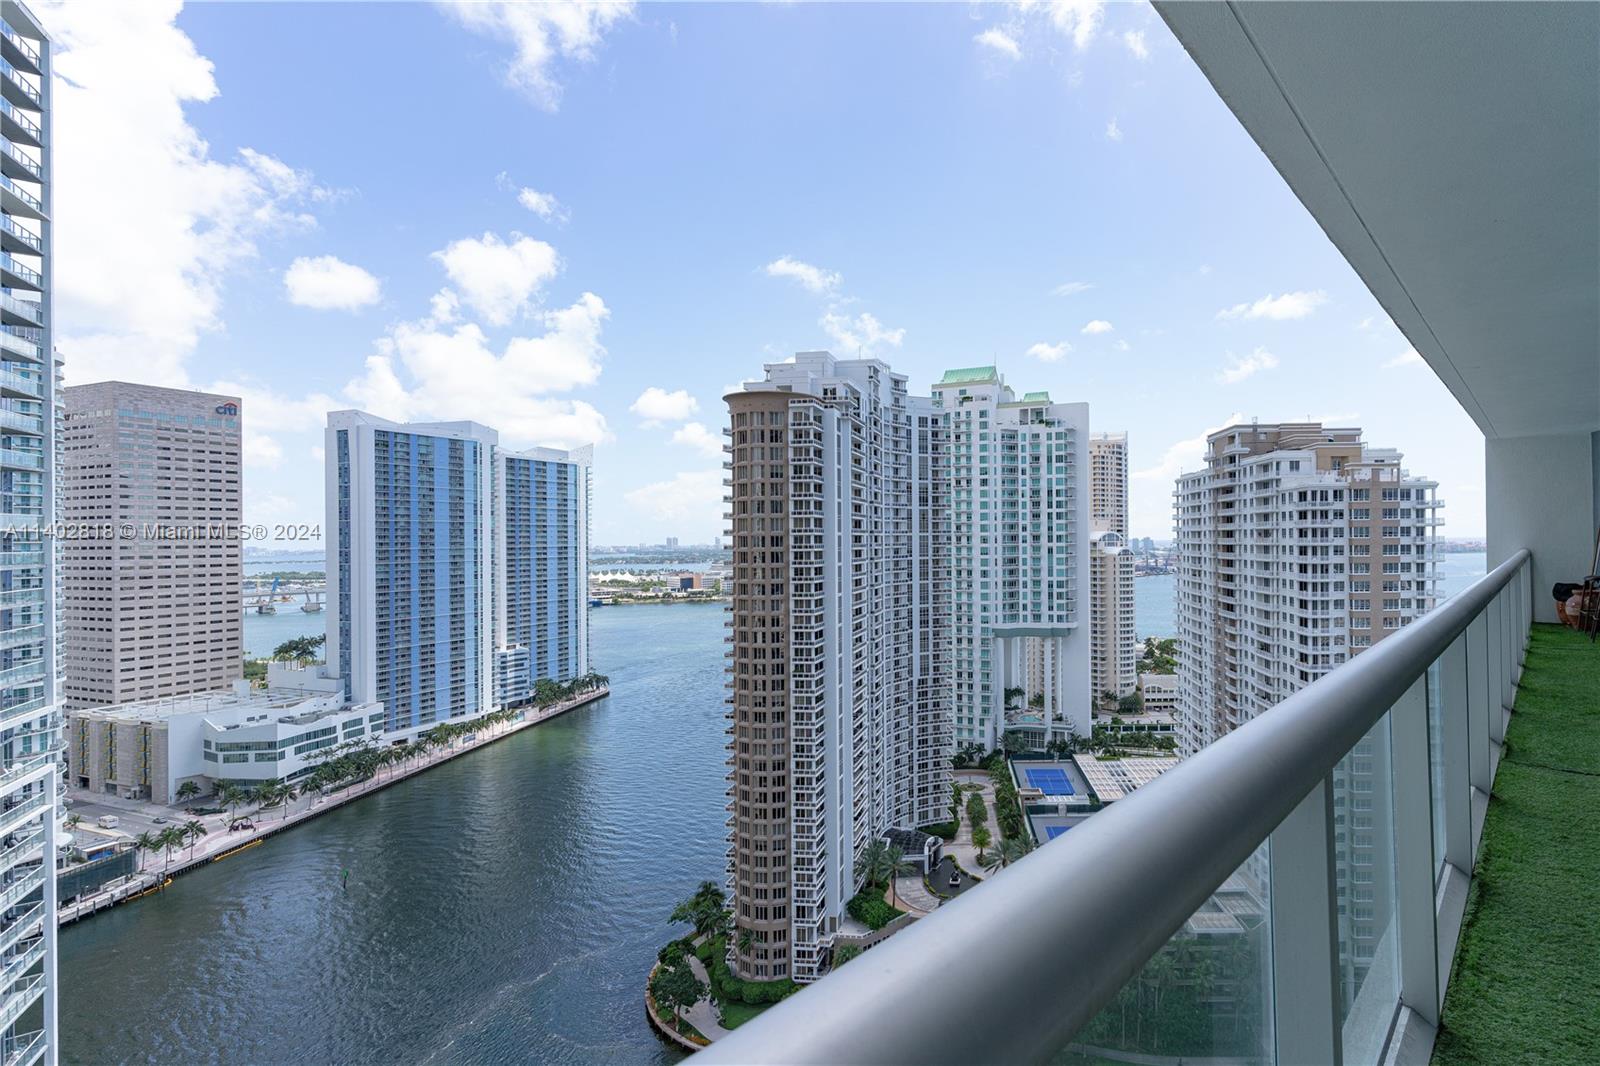 Welcome to Icon Brickell on the 27th floor, where luxury living meets breathtaking bay views. This stunning 2-bedroom, 2-bathroom unit with a Den offers an exceptional rental opportunity. Located in the heart of Brickell, you'll find yourself within walking distance of the finest restaurants and stores that this vibrant neighborhood has to offer. Don't miss your chance to reside in this exceptional residence at Icon Brickell. Experience the convenience of city living combined with unparalleled luxury. Contact us today to schedule a viewing and make this extraordinary rental your new home.